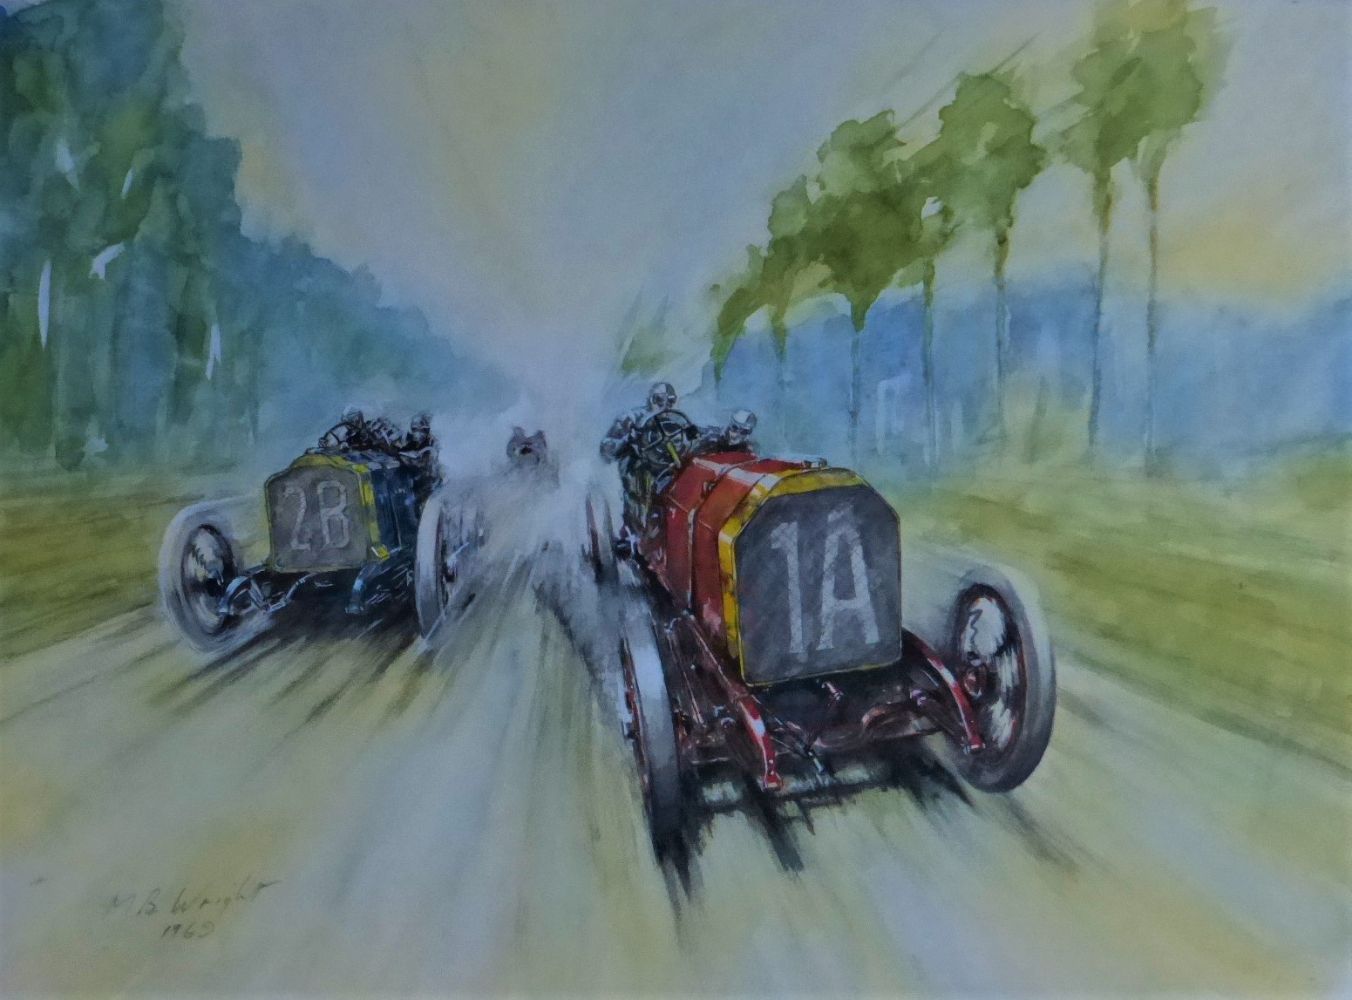 Automobilia, Motoring Literature & Historic Cycling in Partnership with Transport Collector Auctions